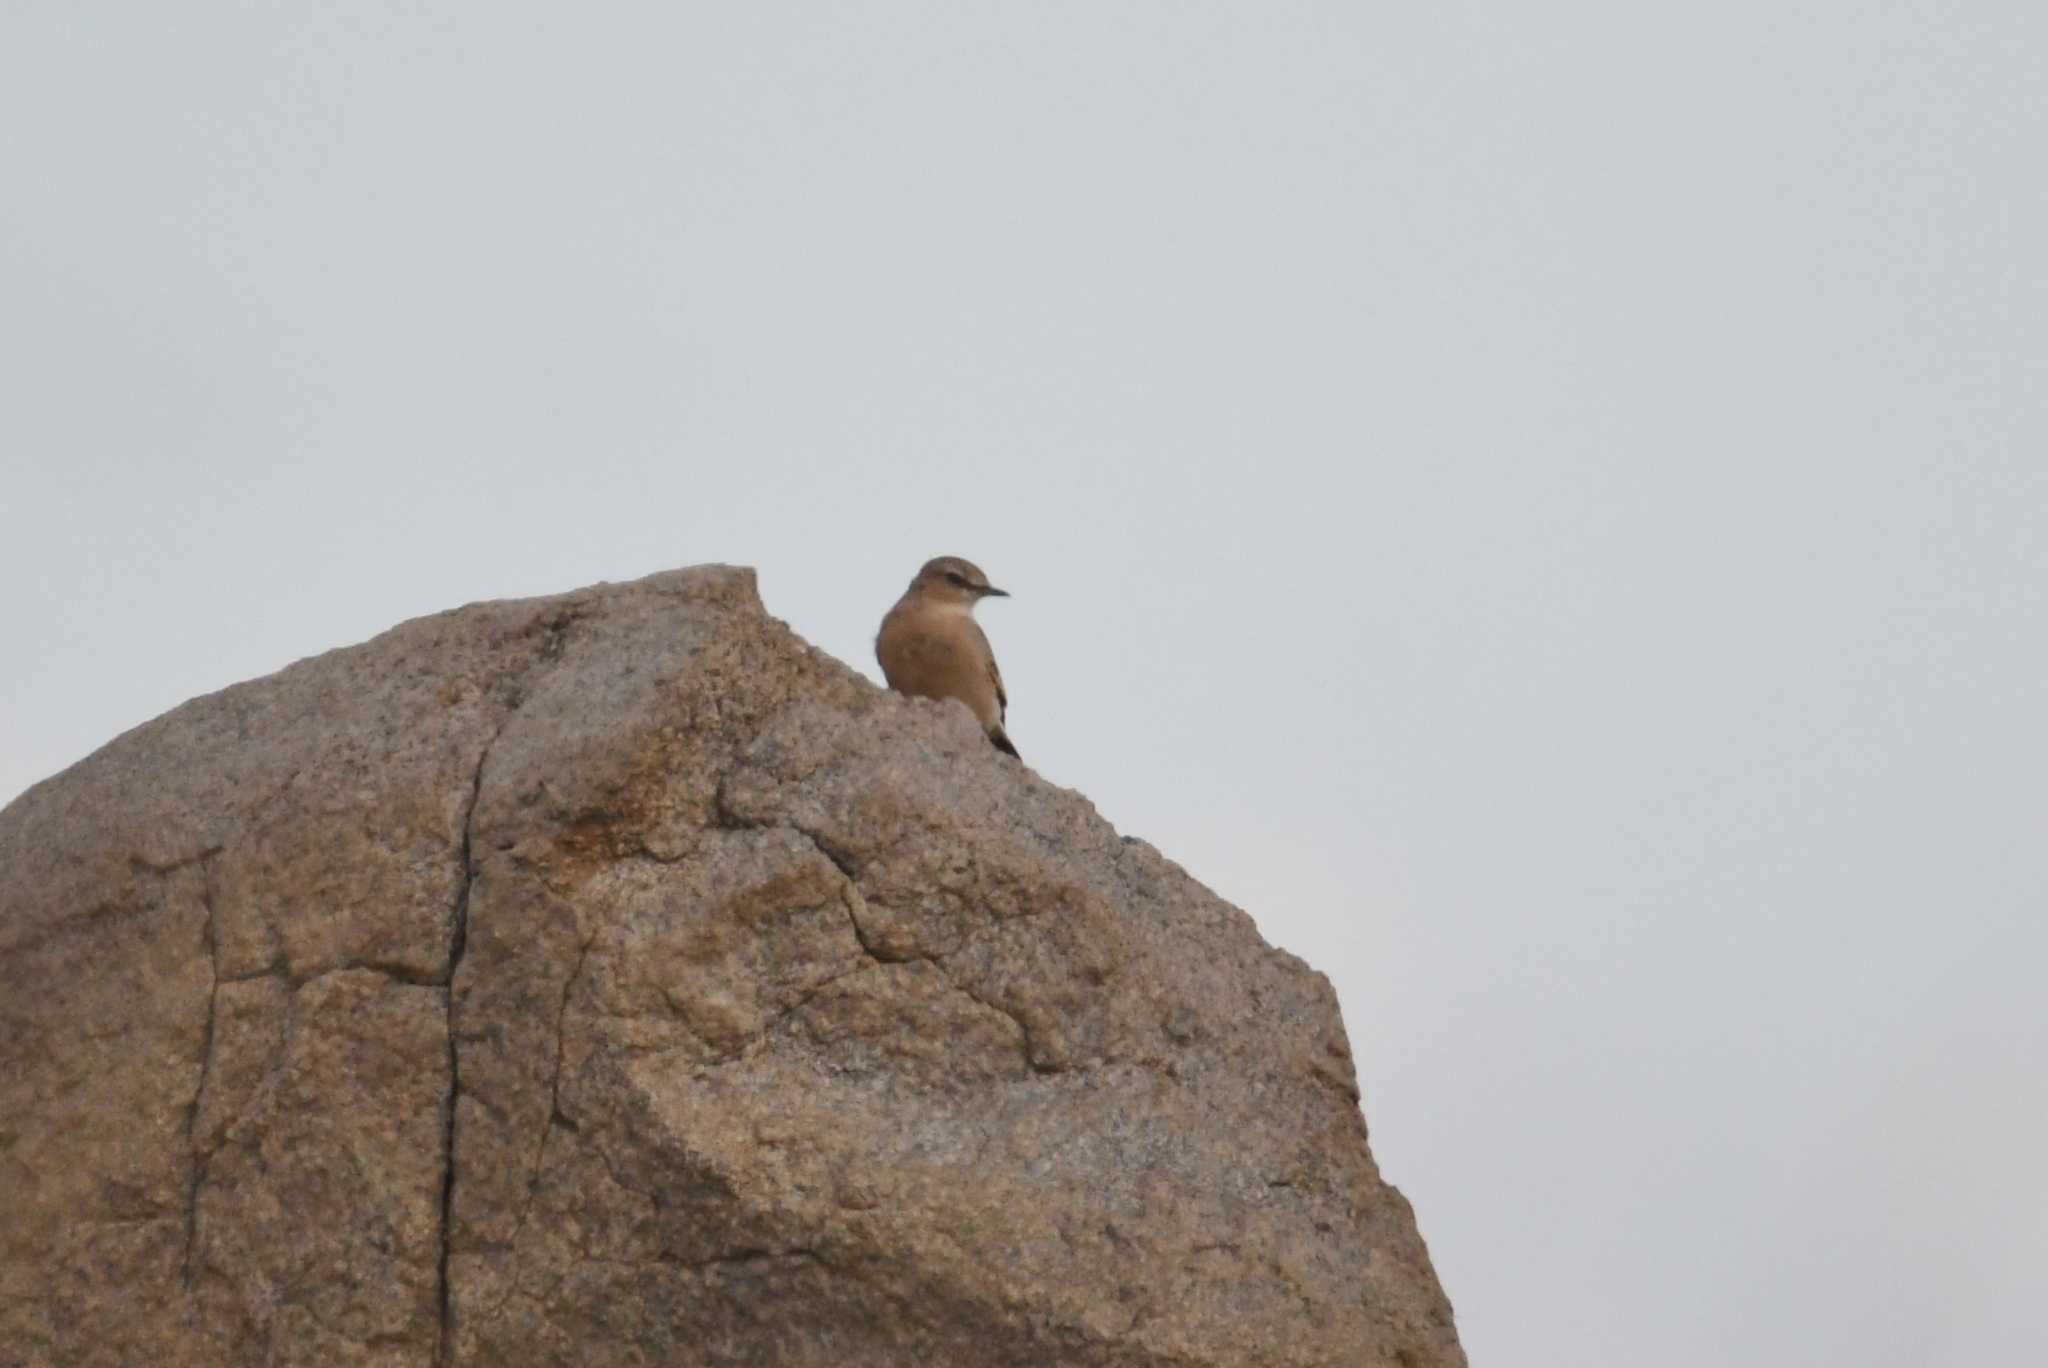 Photo of Isabelline Wheatear at 中央ゴビ by あひる